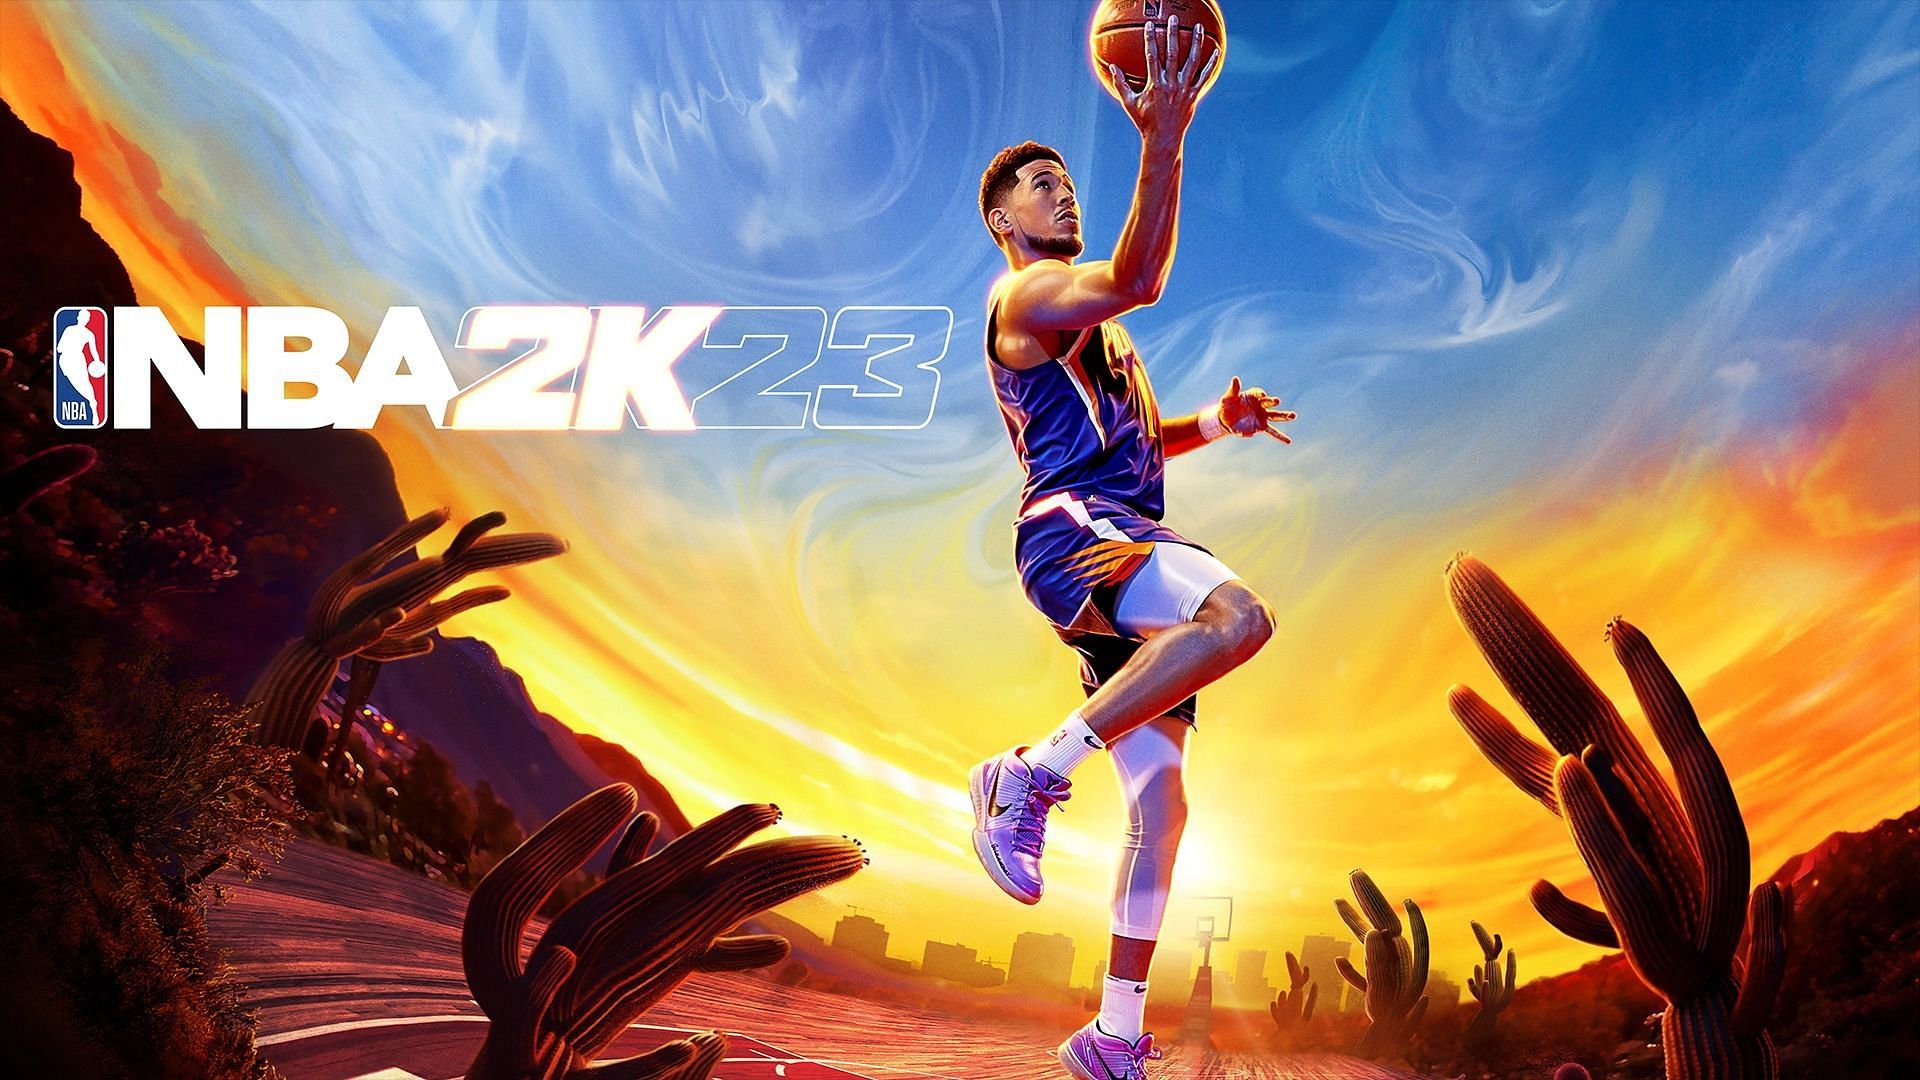 NBA 2K23 season 3 is expected to be released at the start of December.